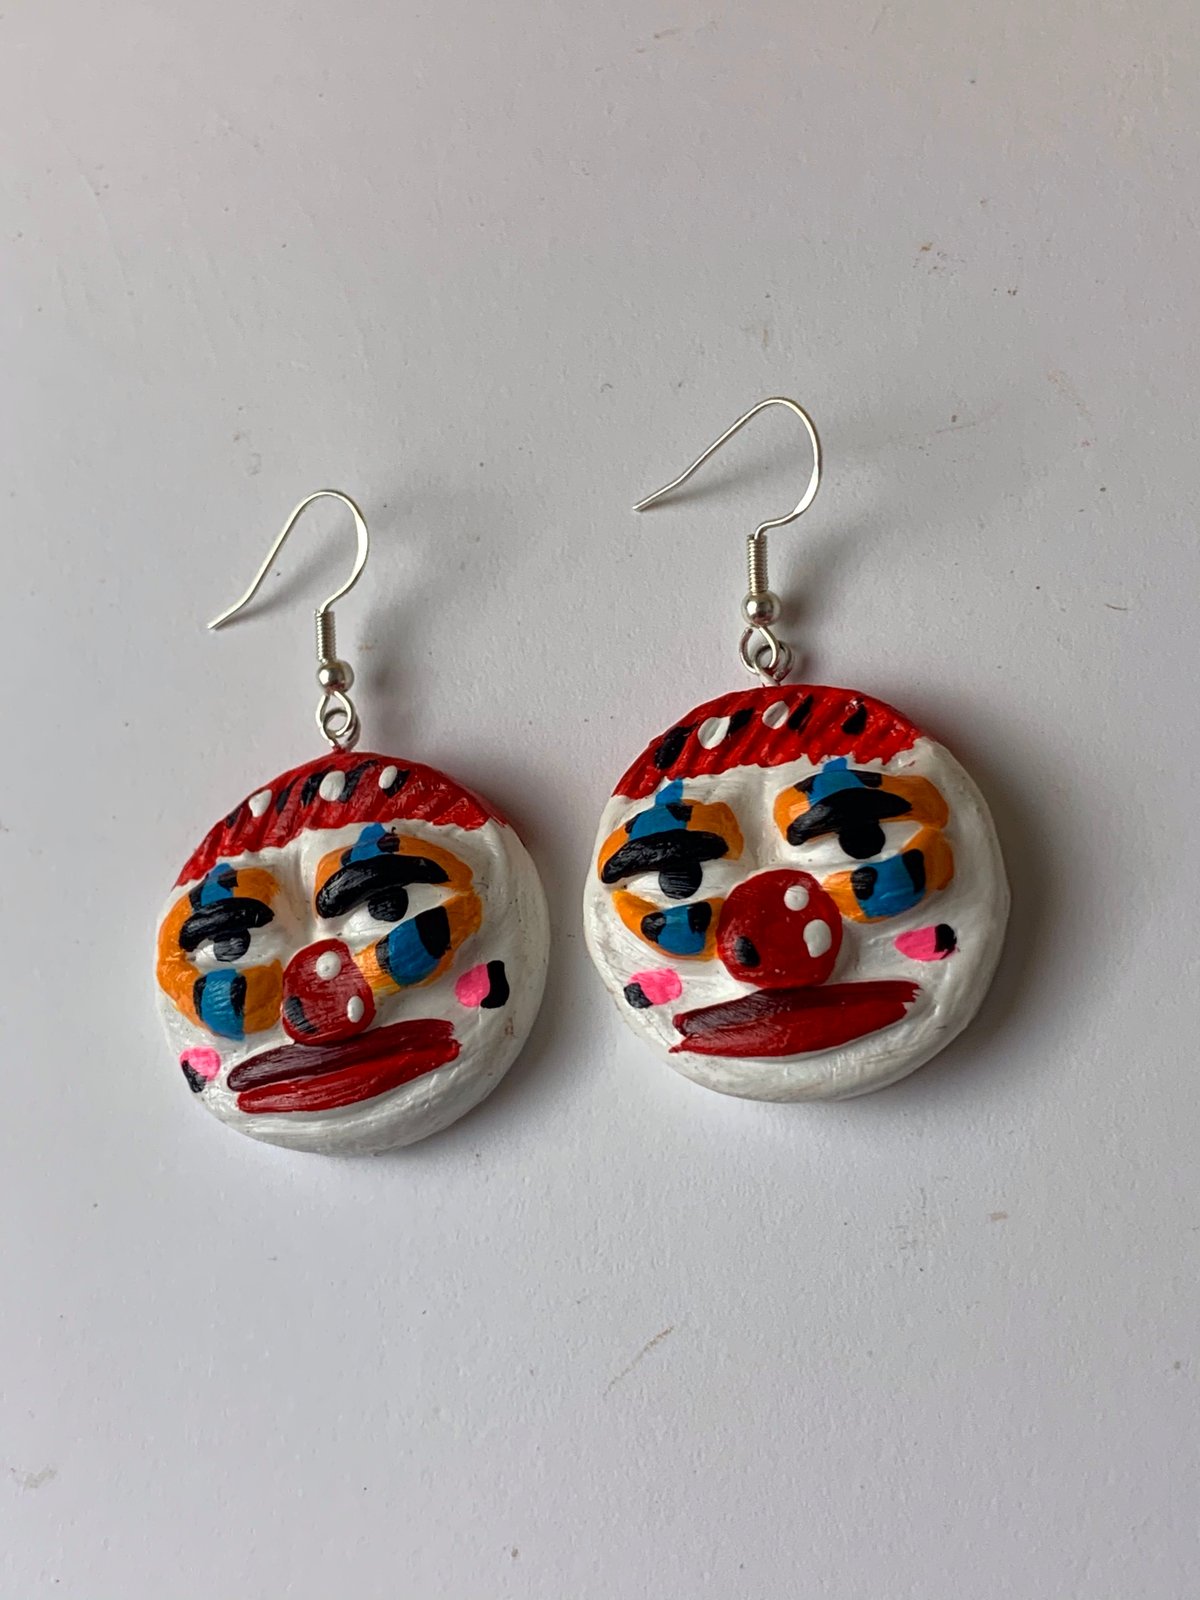 CLOWNIN\u2019 AROUND TOWN hand painted mismatched clown earrings